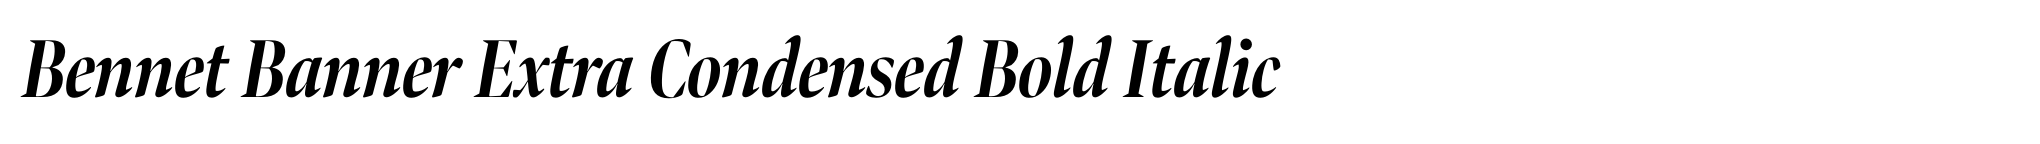 Bennet Banner Extra Condensed Bold Italic image